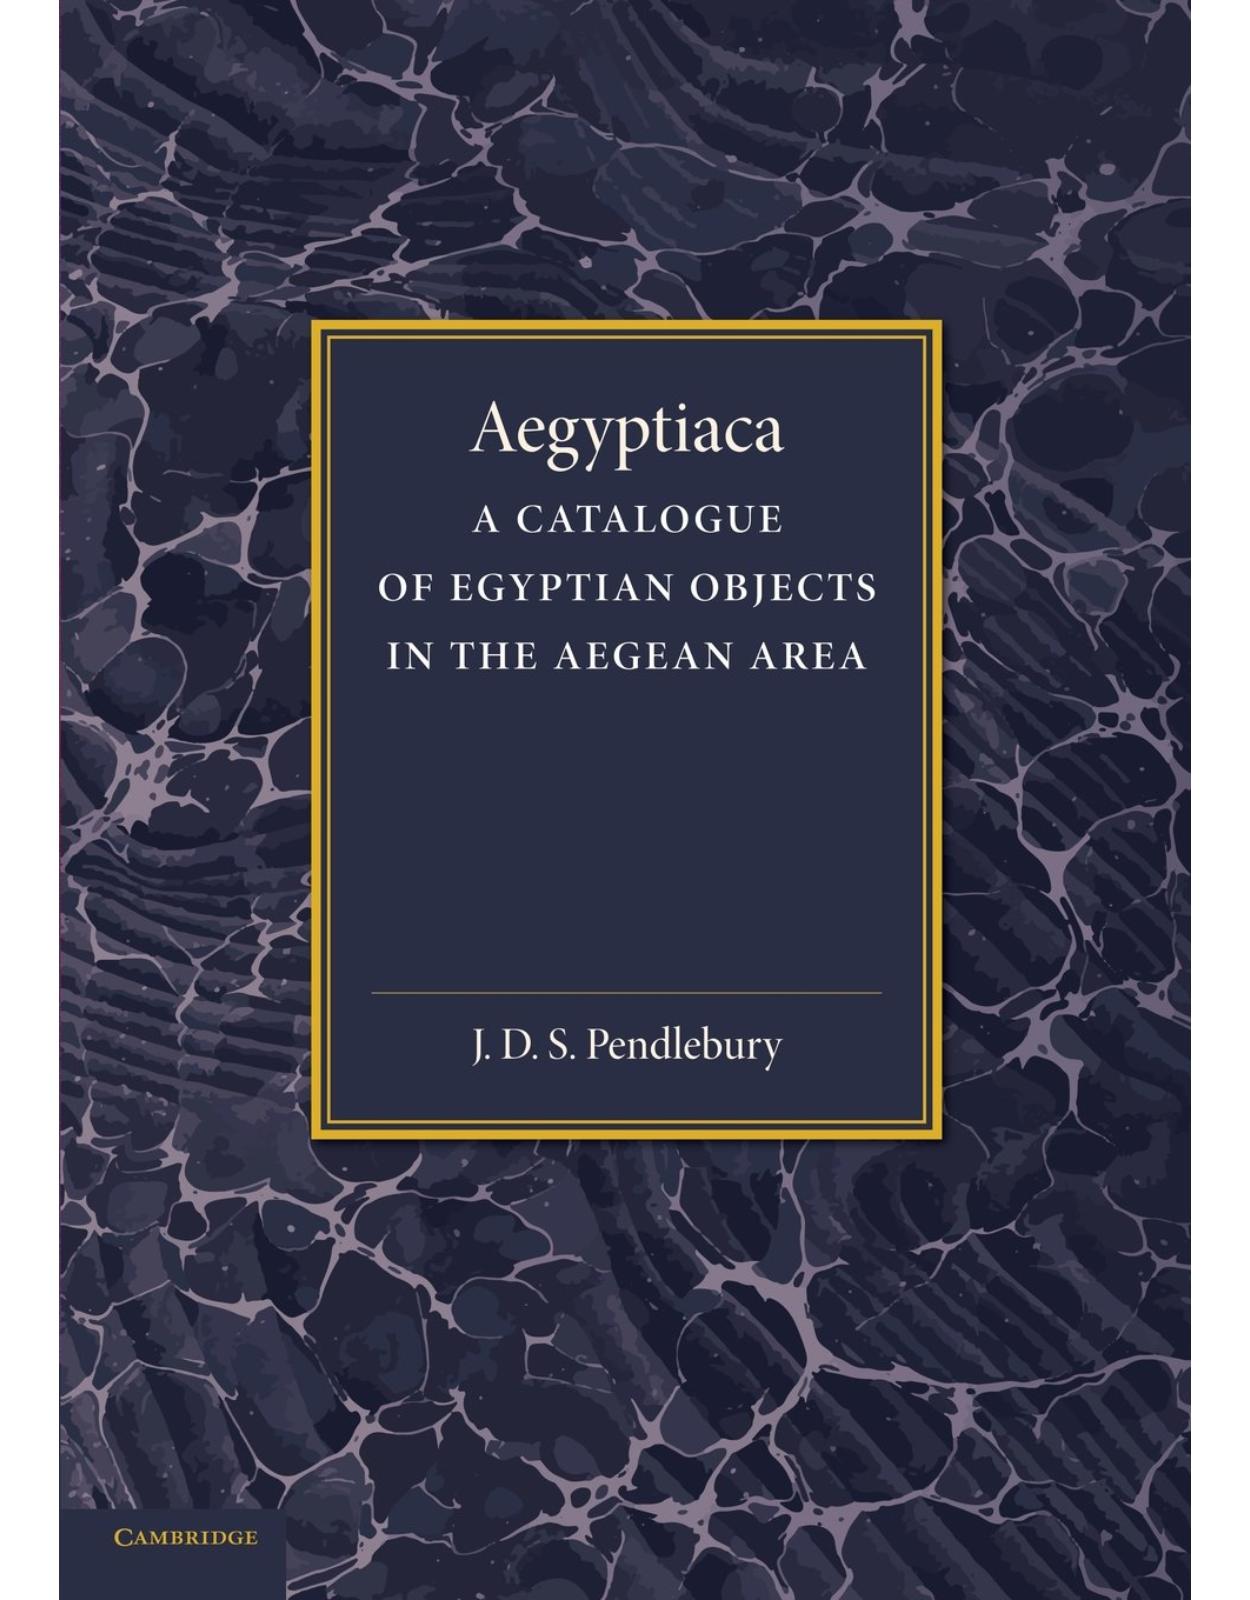 Aegyptiaca: A Catalogue of Egyptian Objects in the Aegean Area